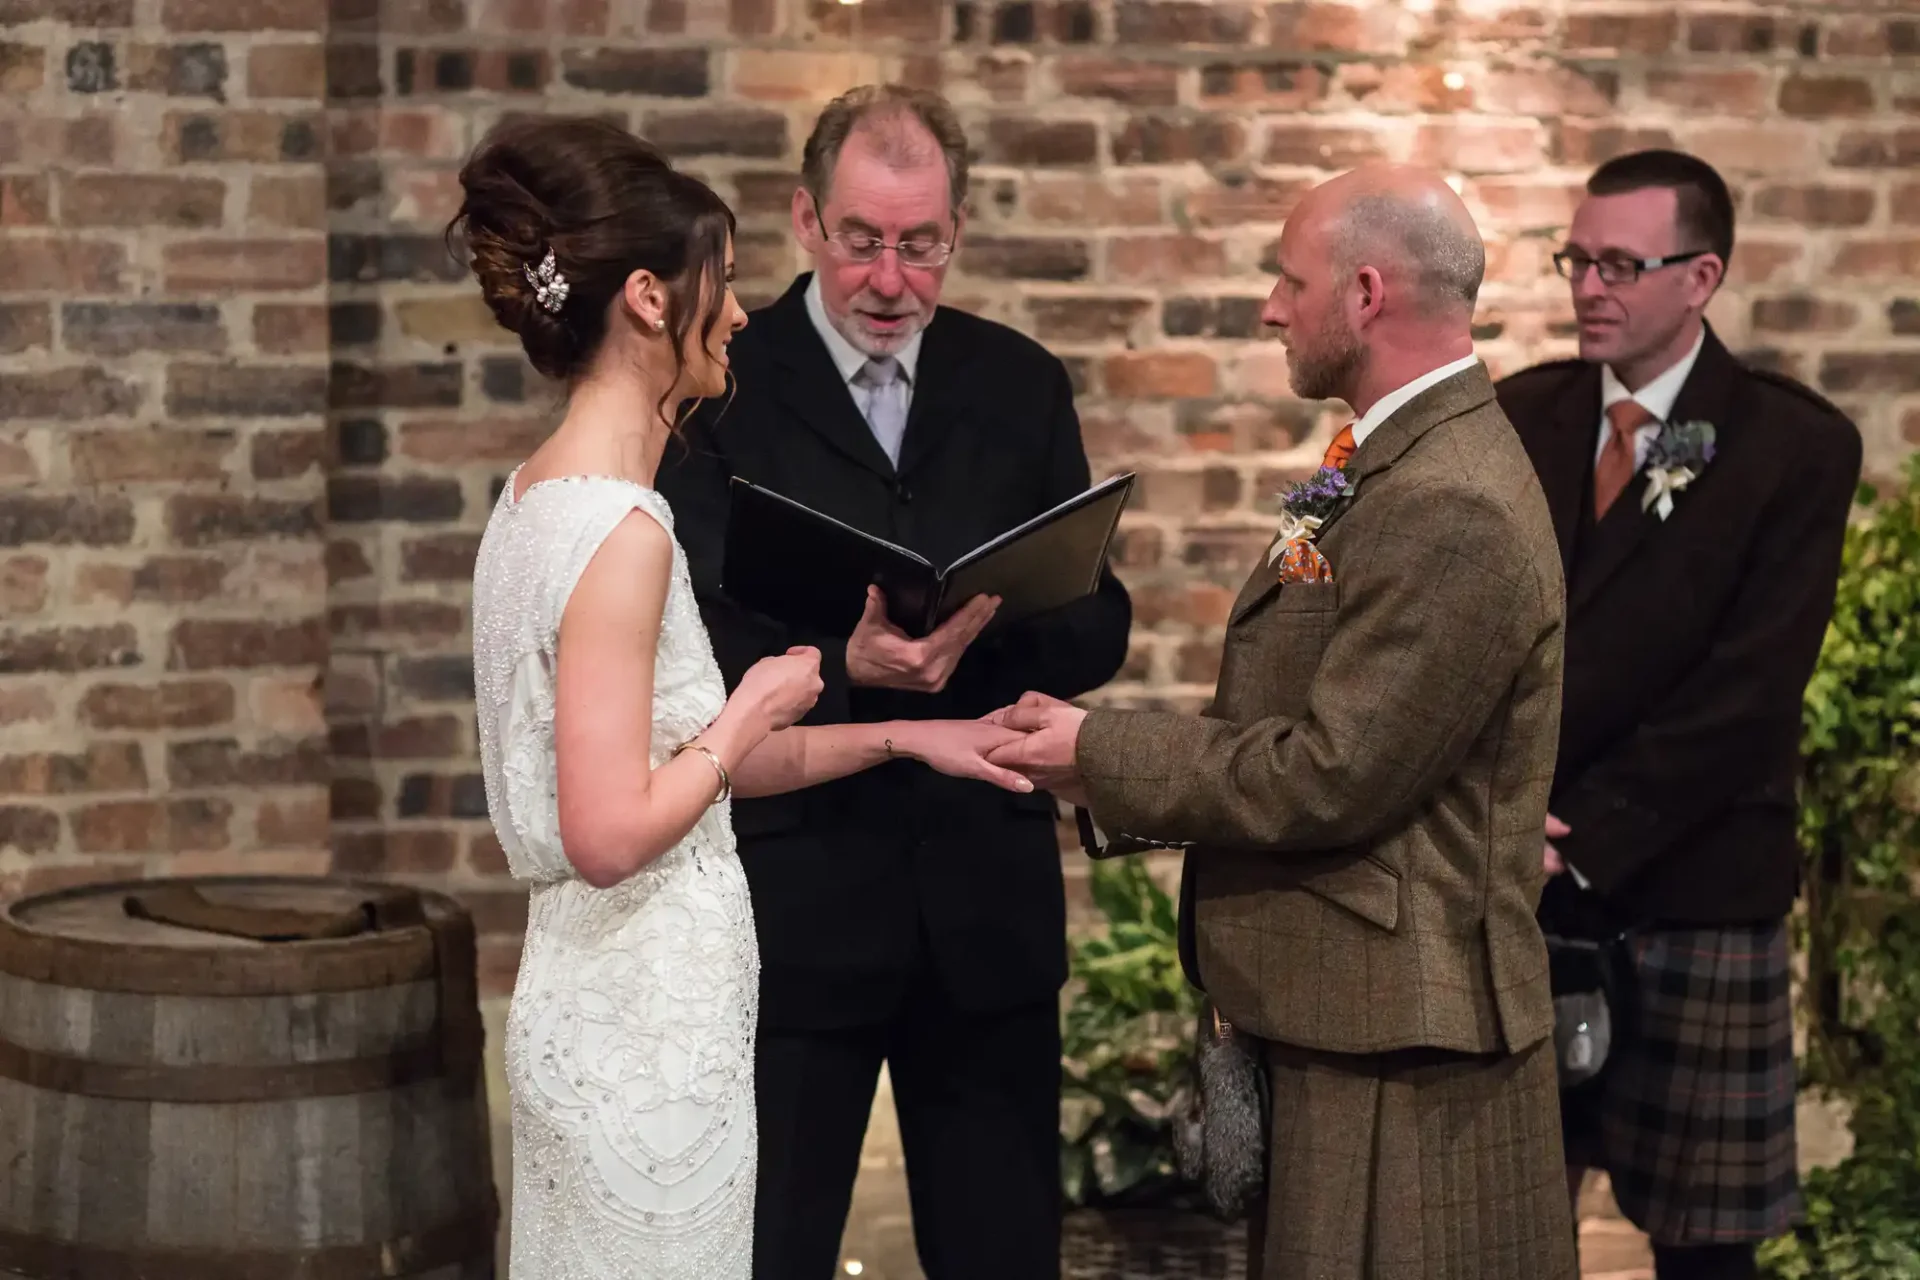 A wedding ceremony with a bride and groom exchanging vows, officiated by a clergyman, in a venue with rustic brick walls and barrel decor.